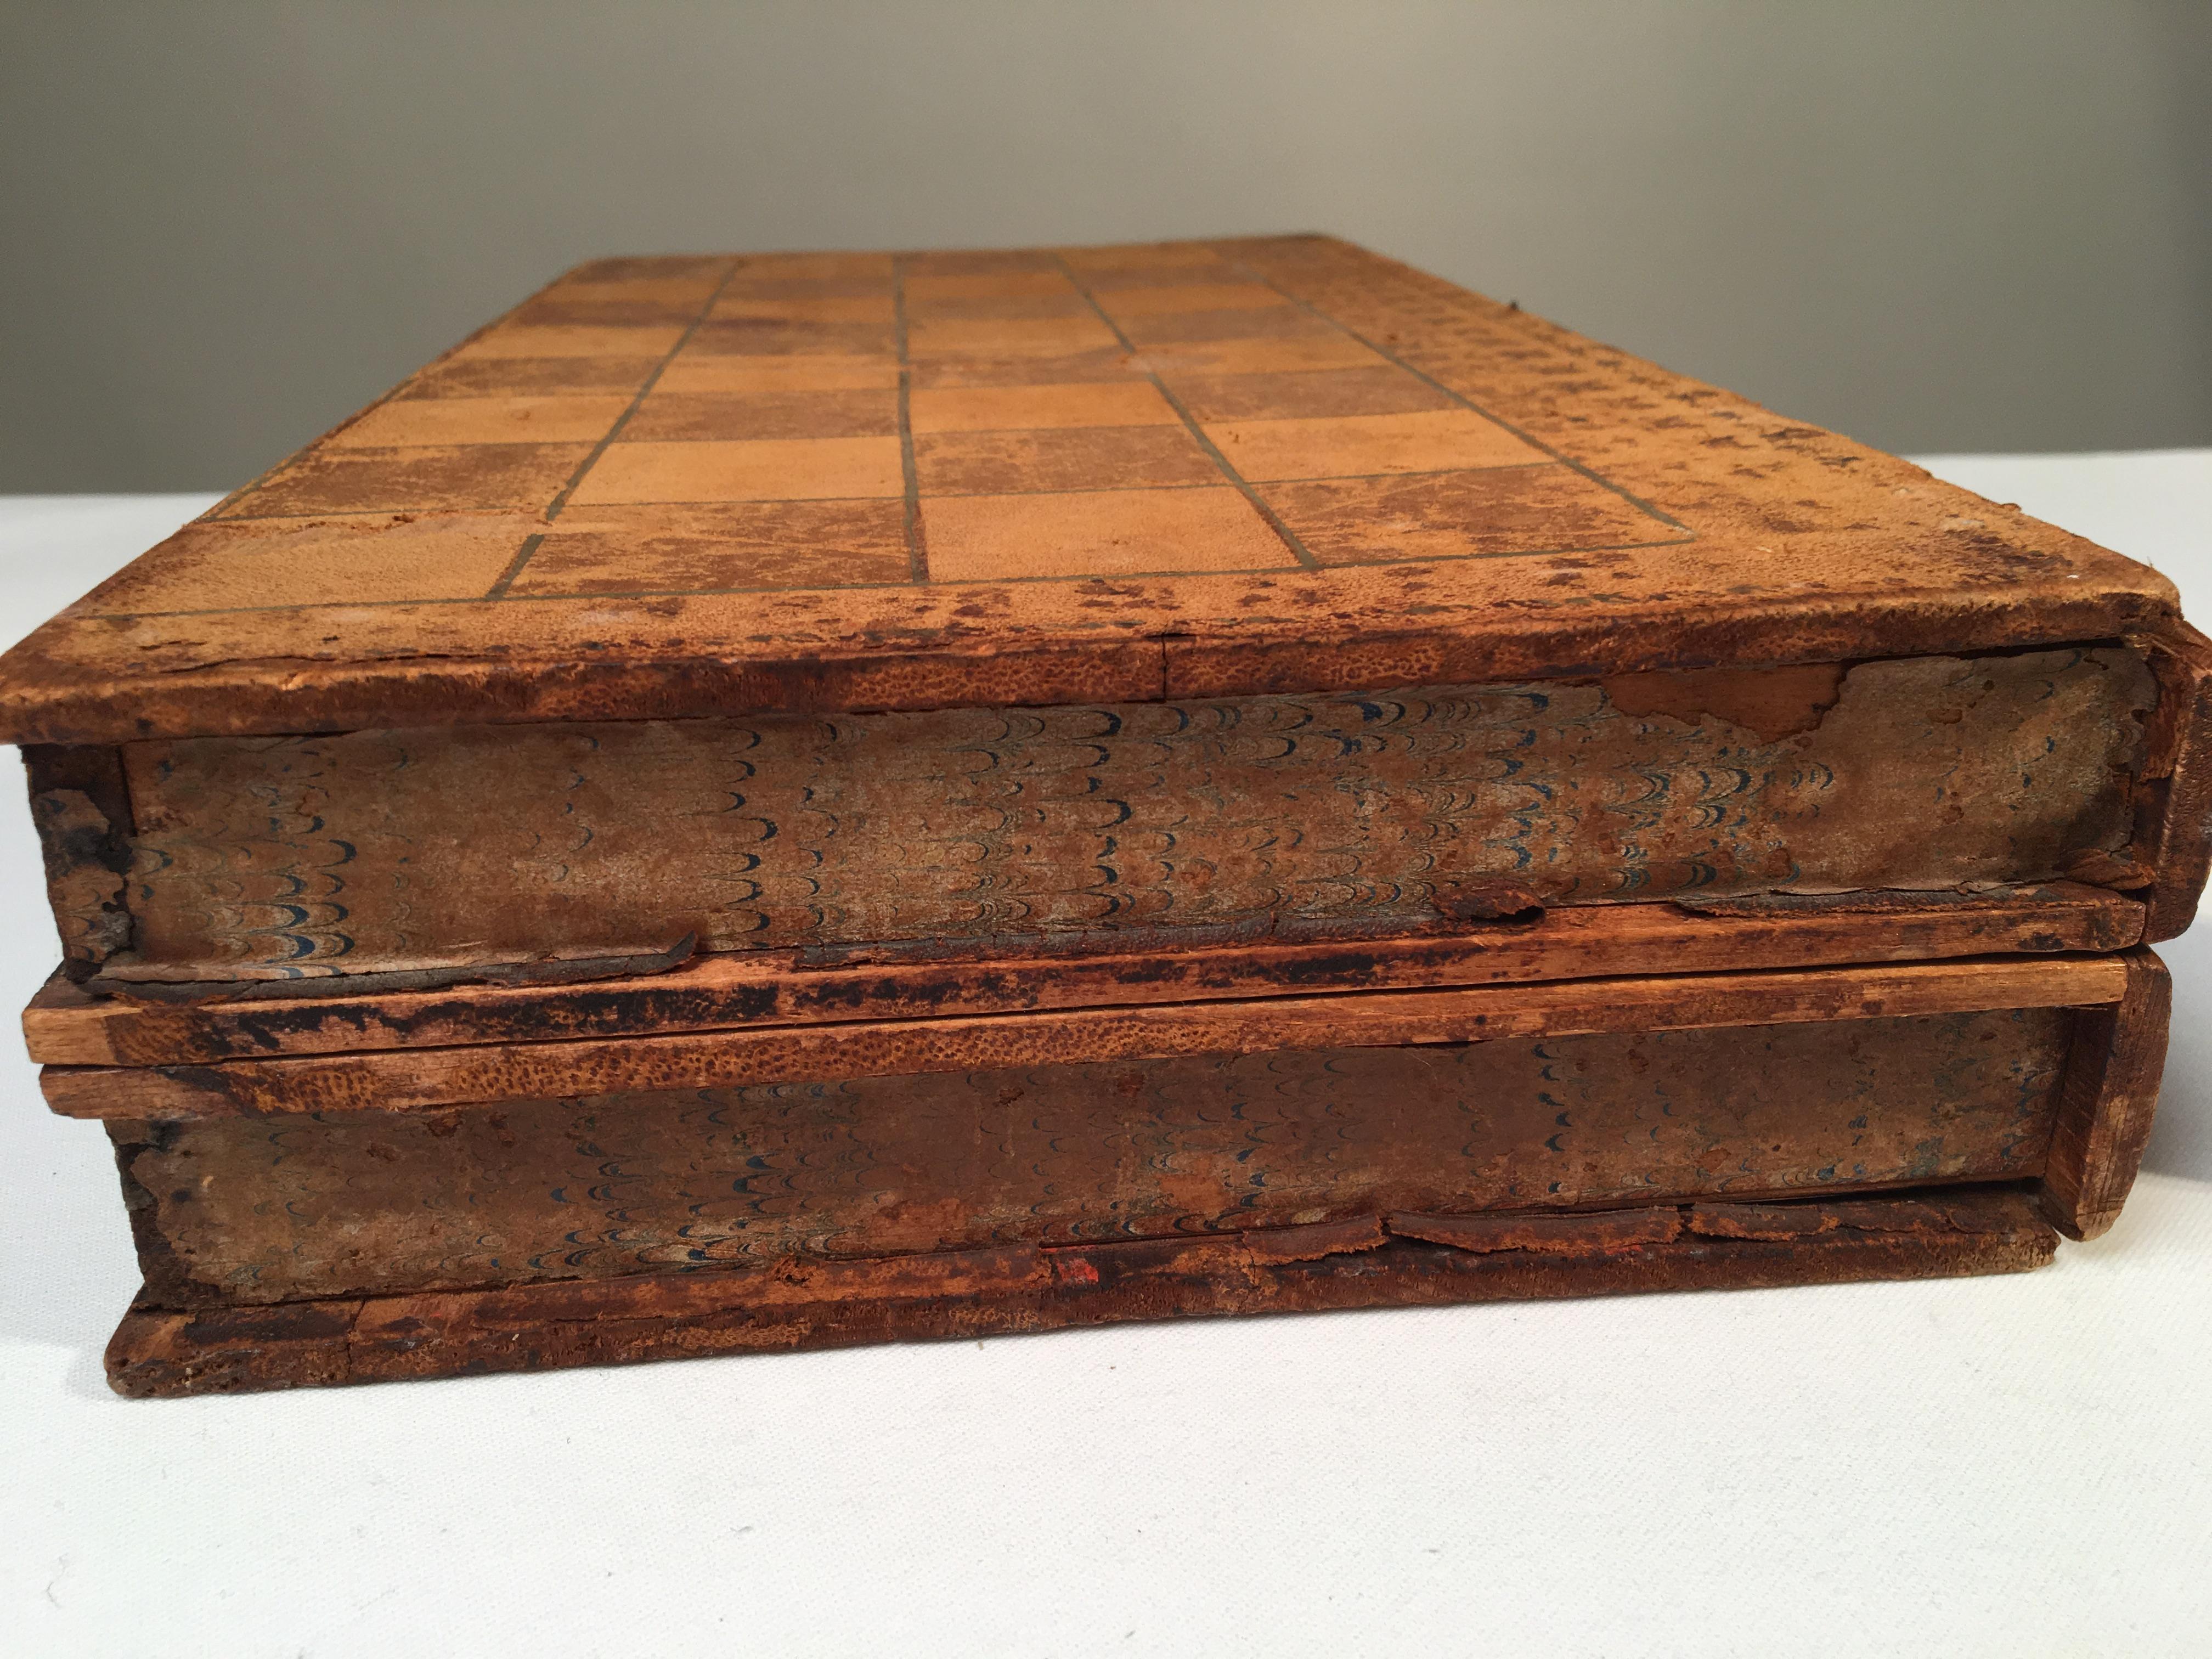 Two game related articles including a leather-covered backgammon/checker board box and a leather playing card box.